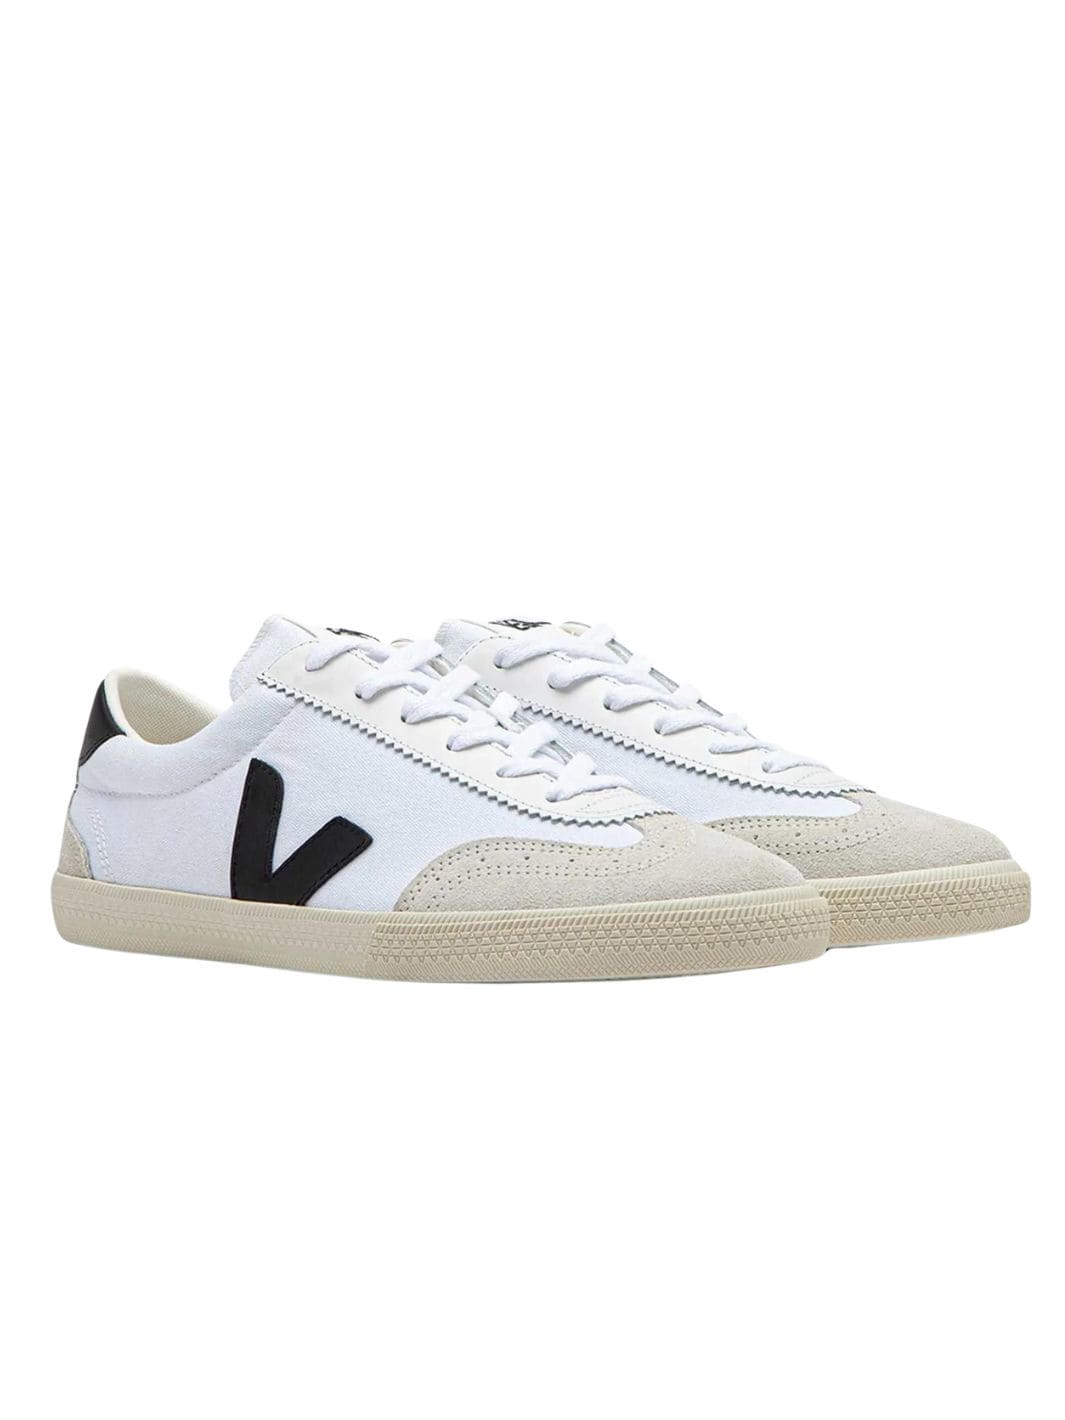 Veja Shoes Sneakers | Volley Canvas White Black